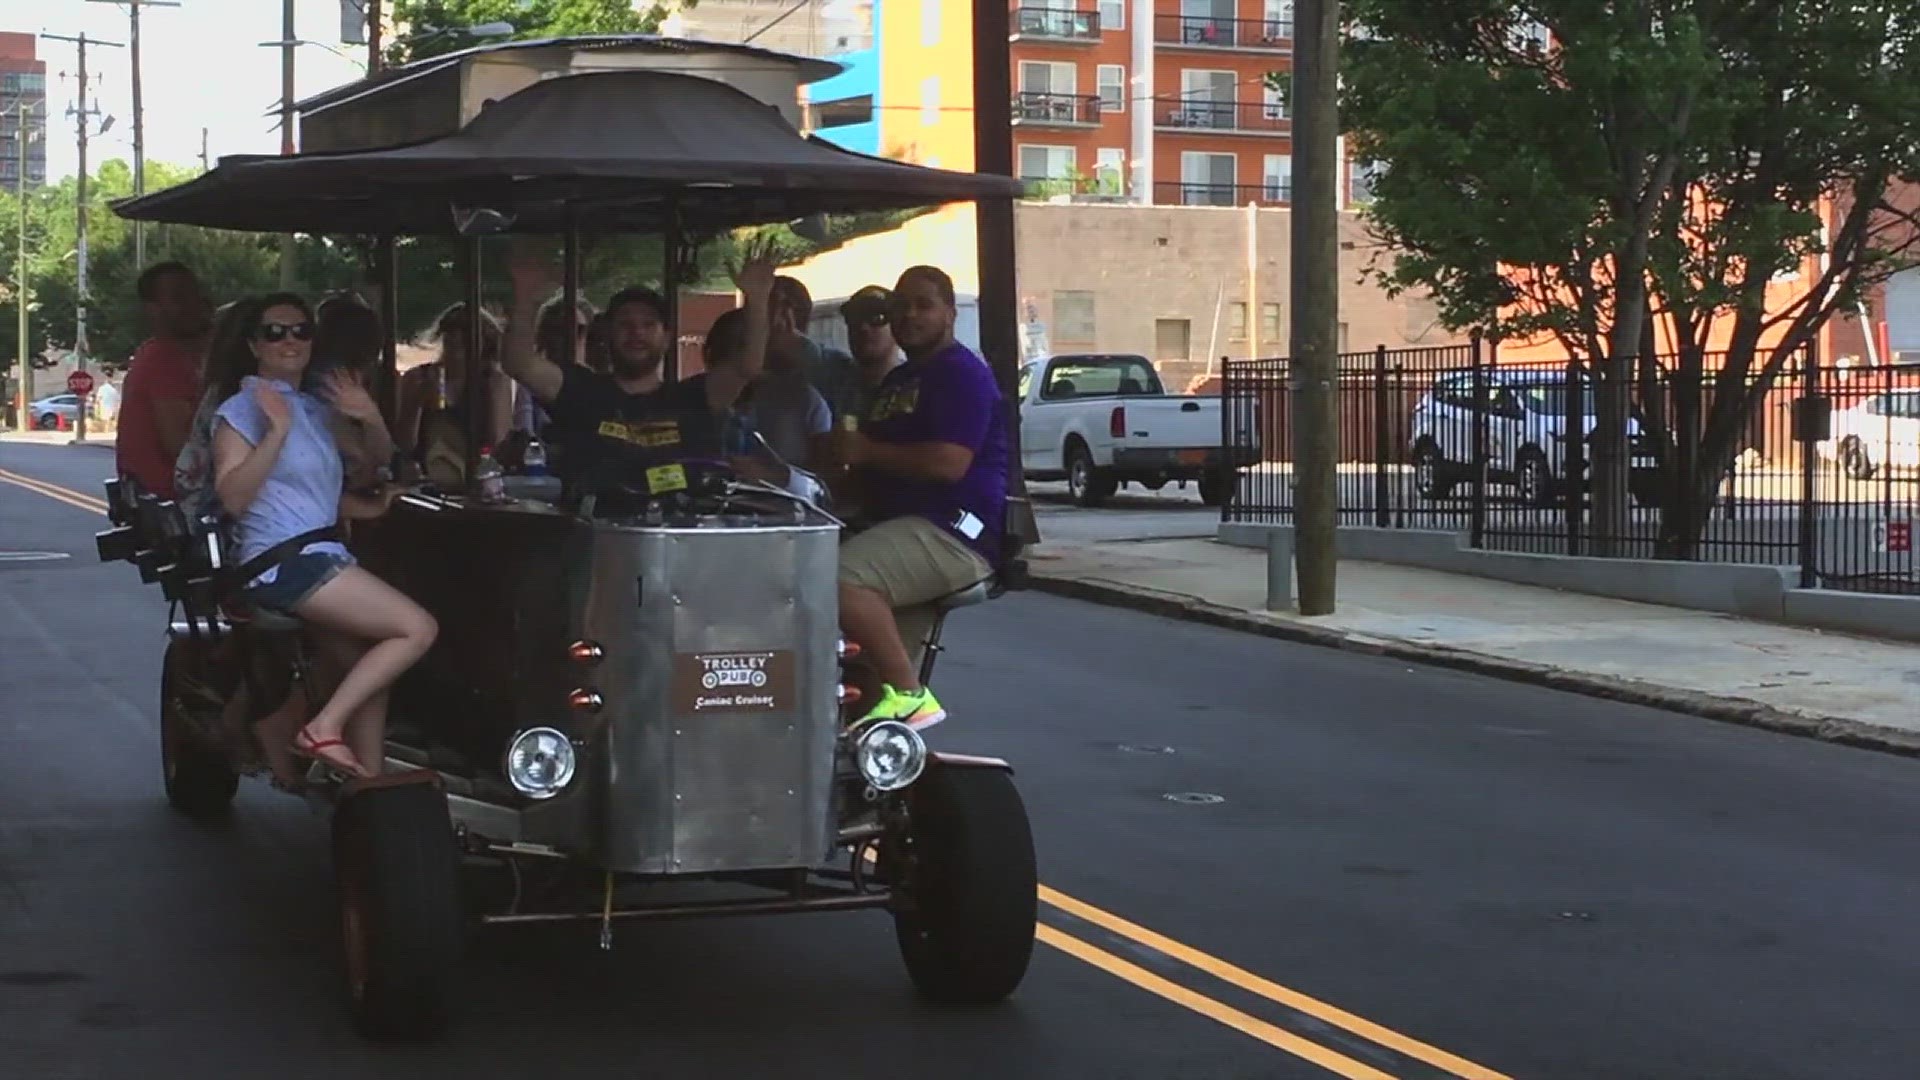 Previously known as Pedal Pub, Trolley Pub Quad Cities is returning to the region for the summer season.